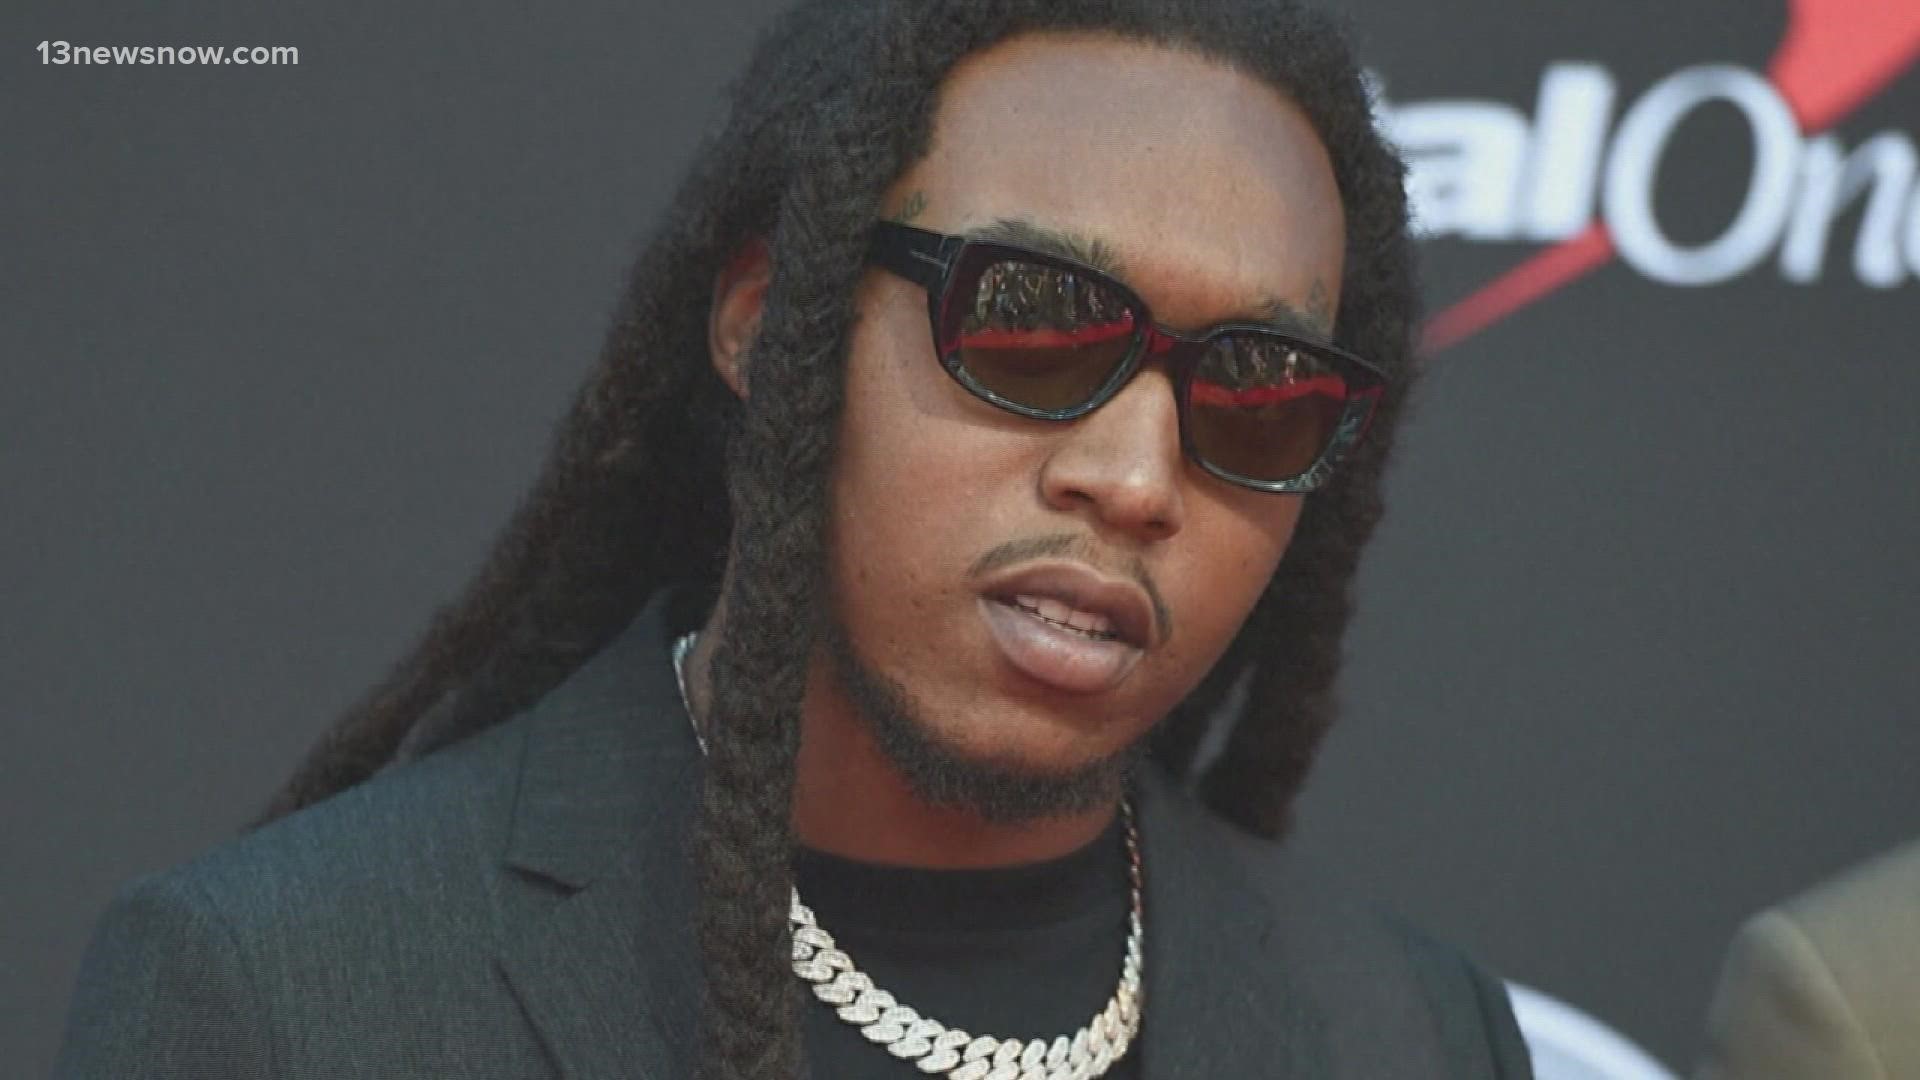 Houston police are confident they will find the person responsible for the shooting death of 28-year-old rapper Takeoff.